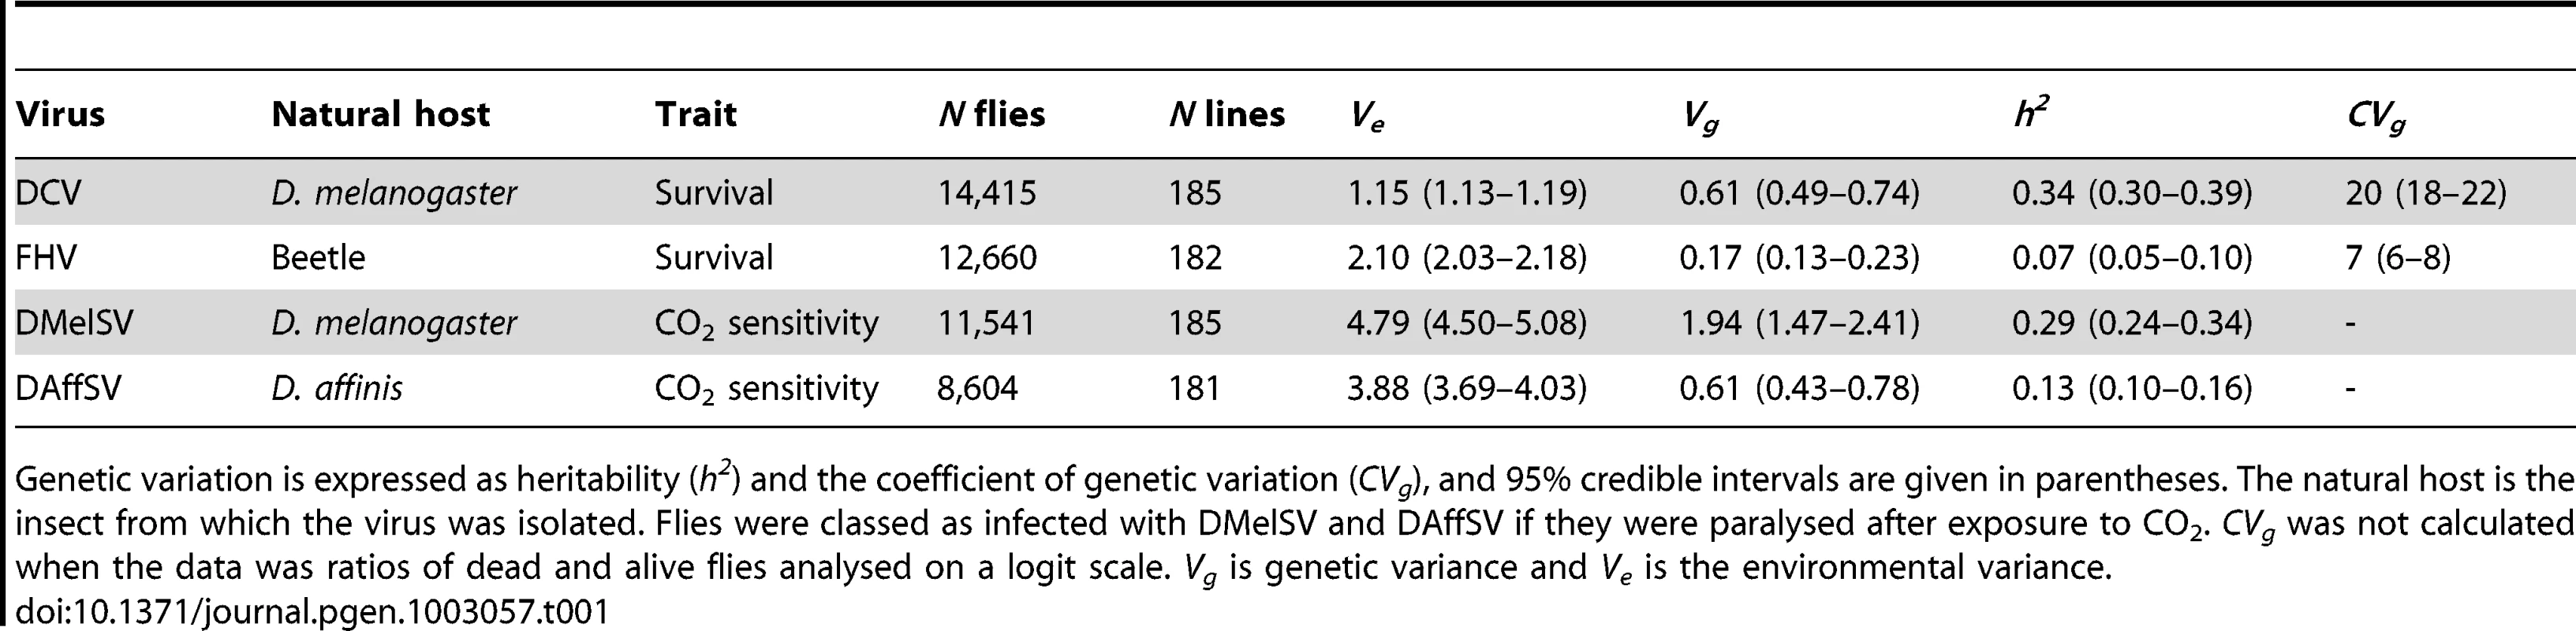 Genetic variation in susceptibility to four different viruses.